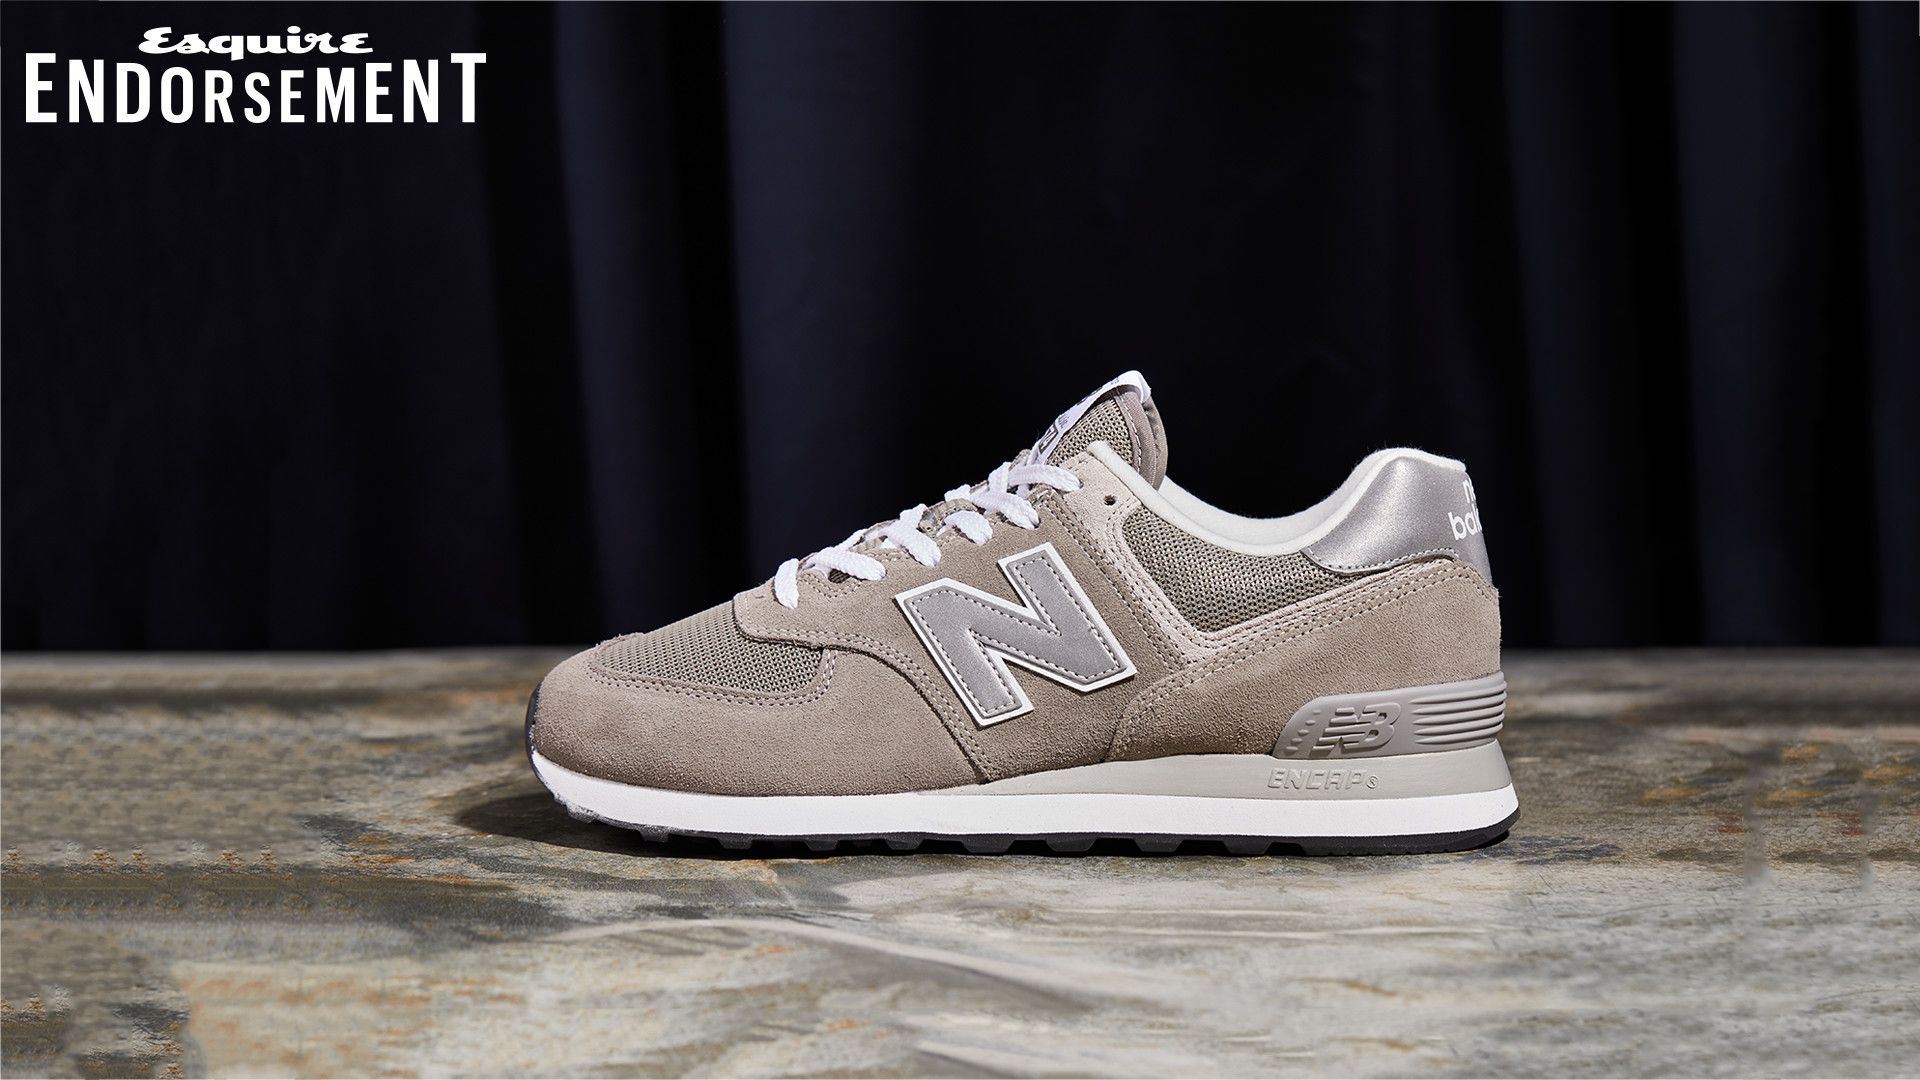 Giet Lieve Middeleeuws New Balance 574 Sneakers - The Sneaker That's So Anti-Fashion It's  Fashionable Again